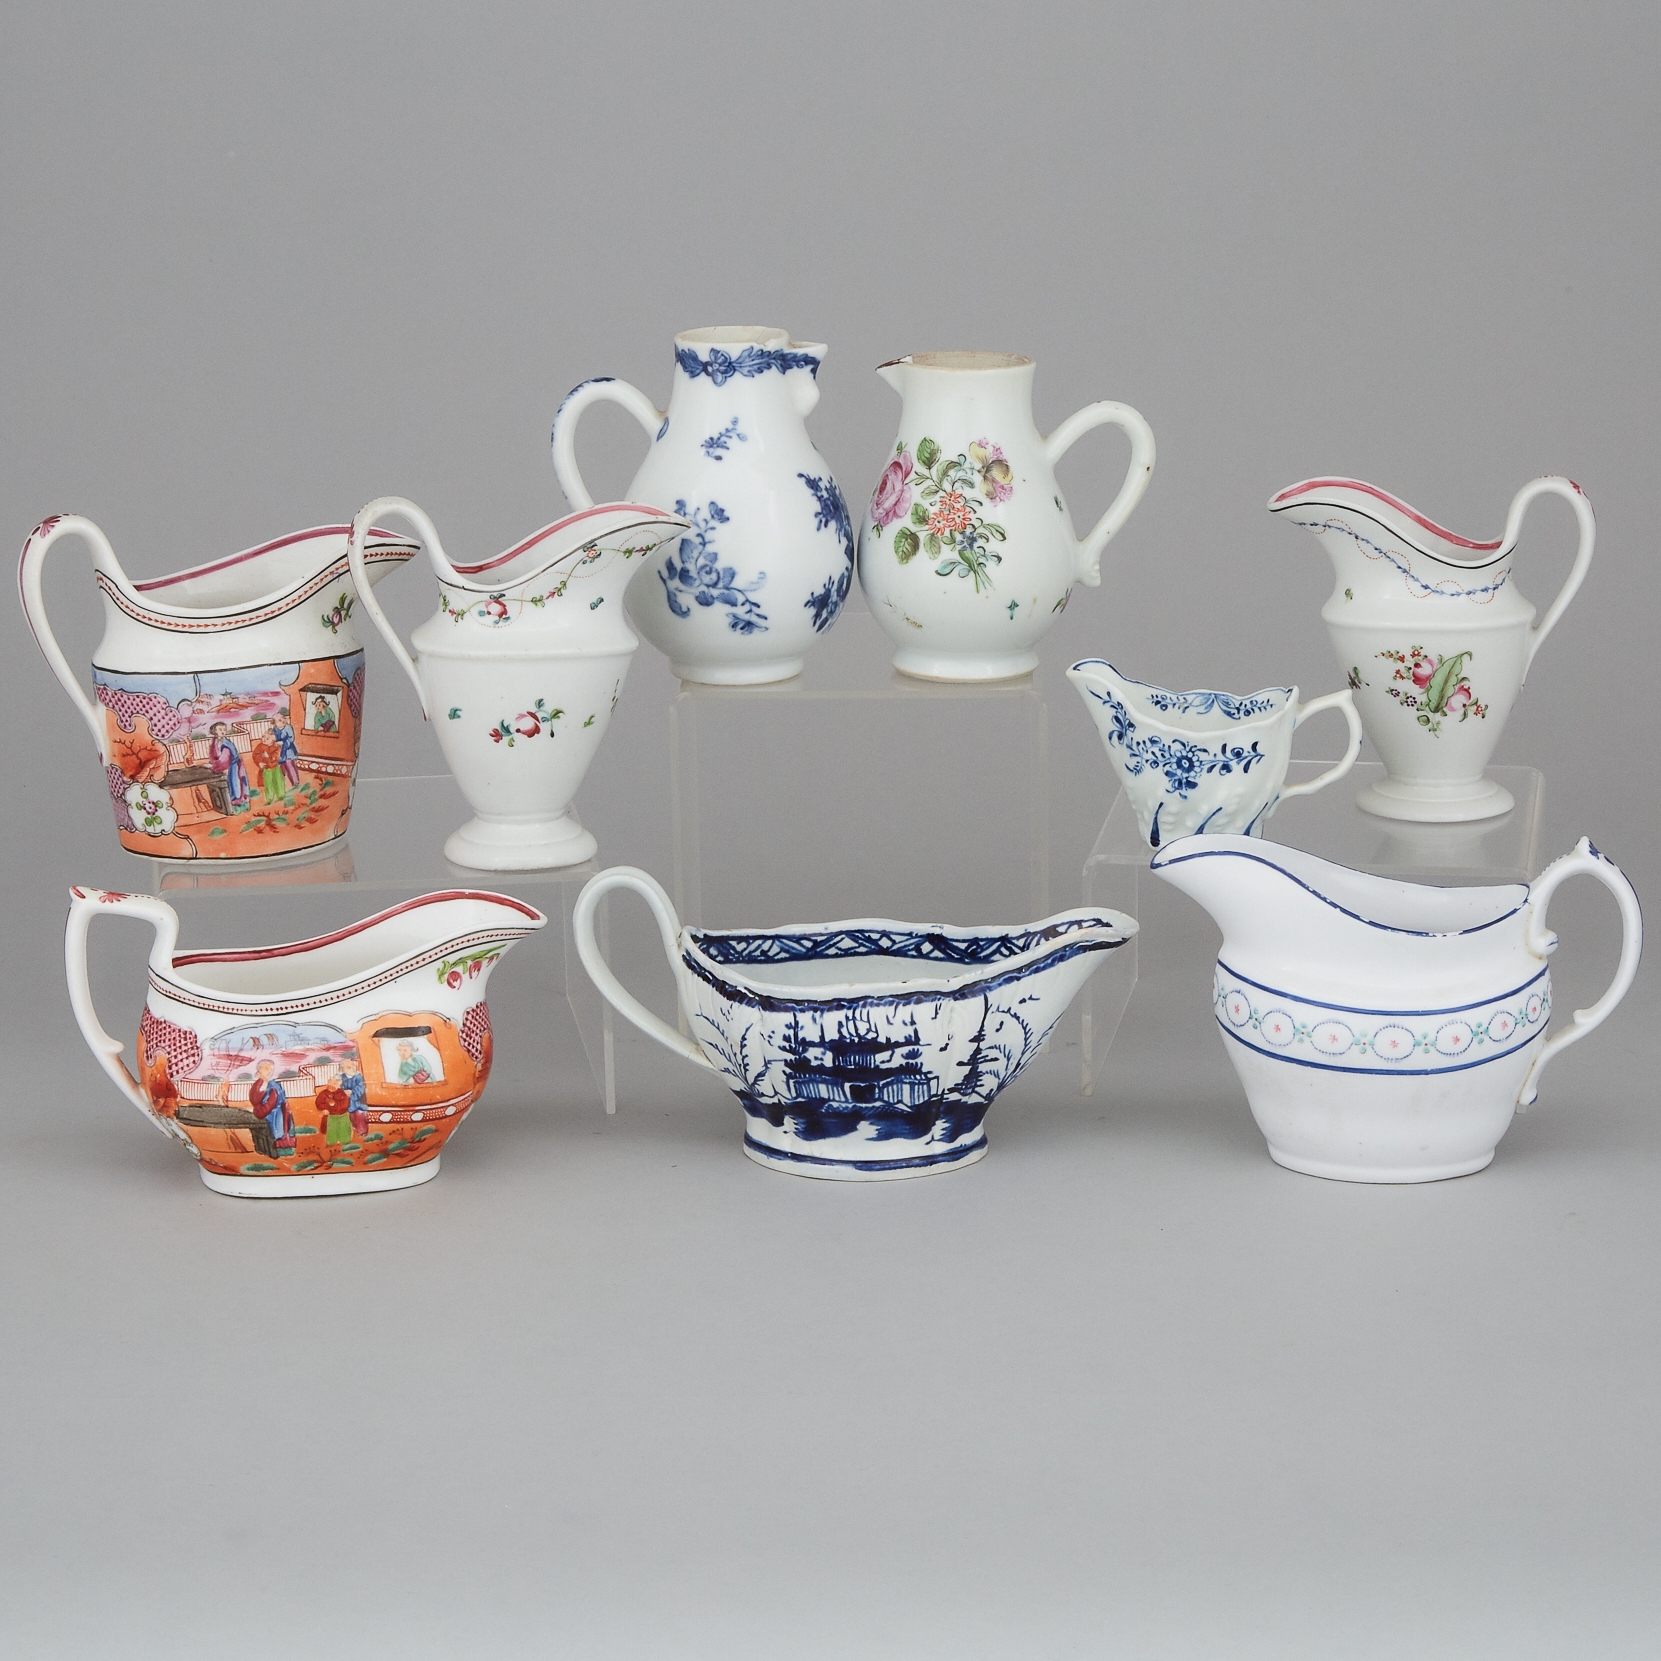 Nine Various English and Continental Porcelain and Pottery Cream Jugs and Sauce Boats, 18th/19th century